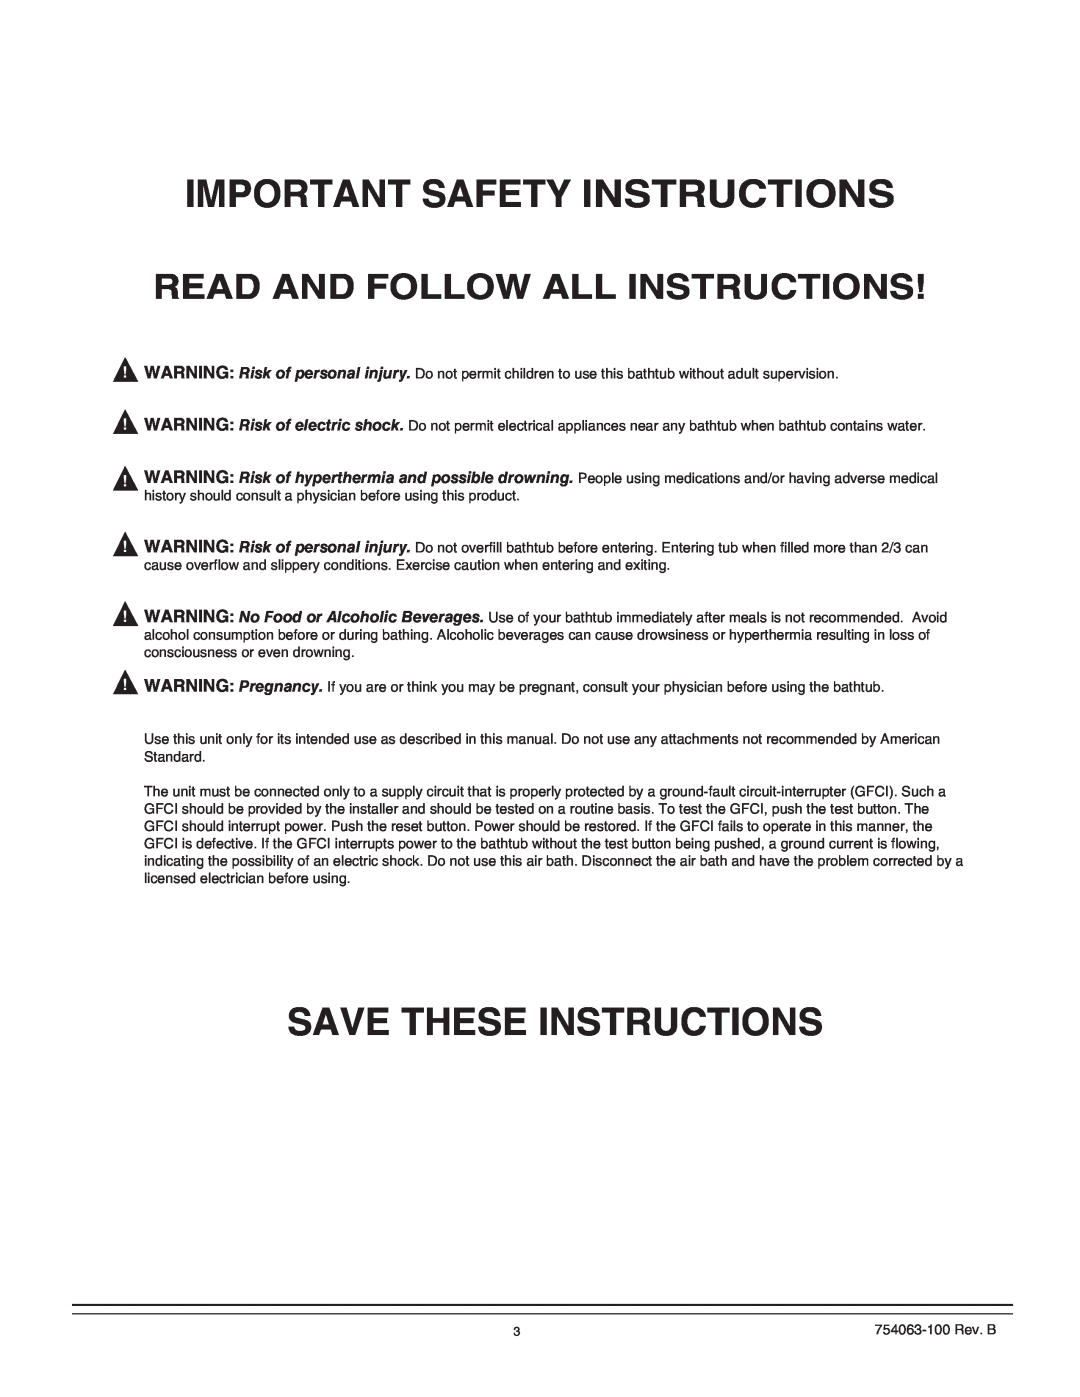 American Standard 3574, 3575, 3572 Important Safety Instructions, Save These Instructions, Read And Follow All Instructions 